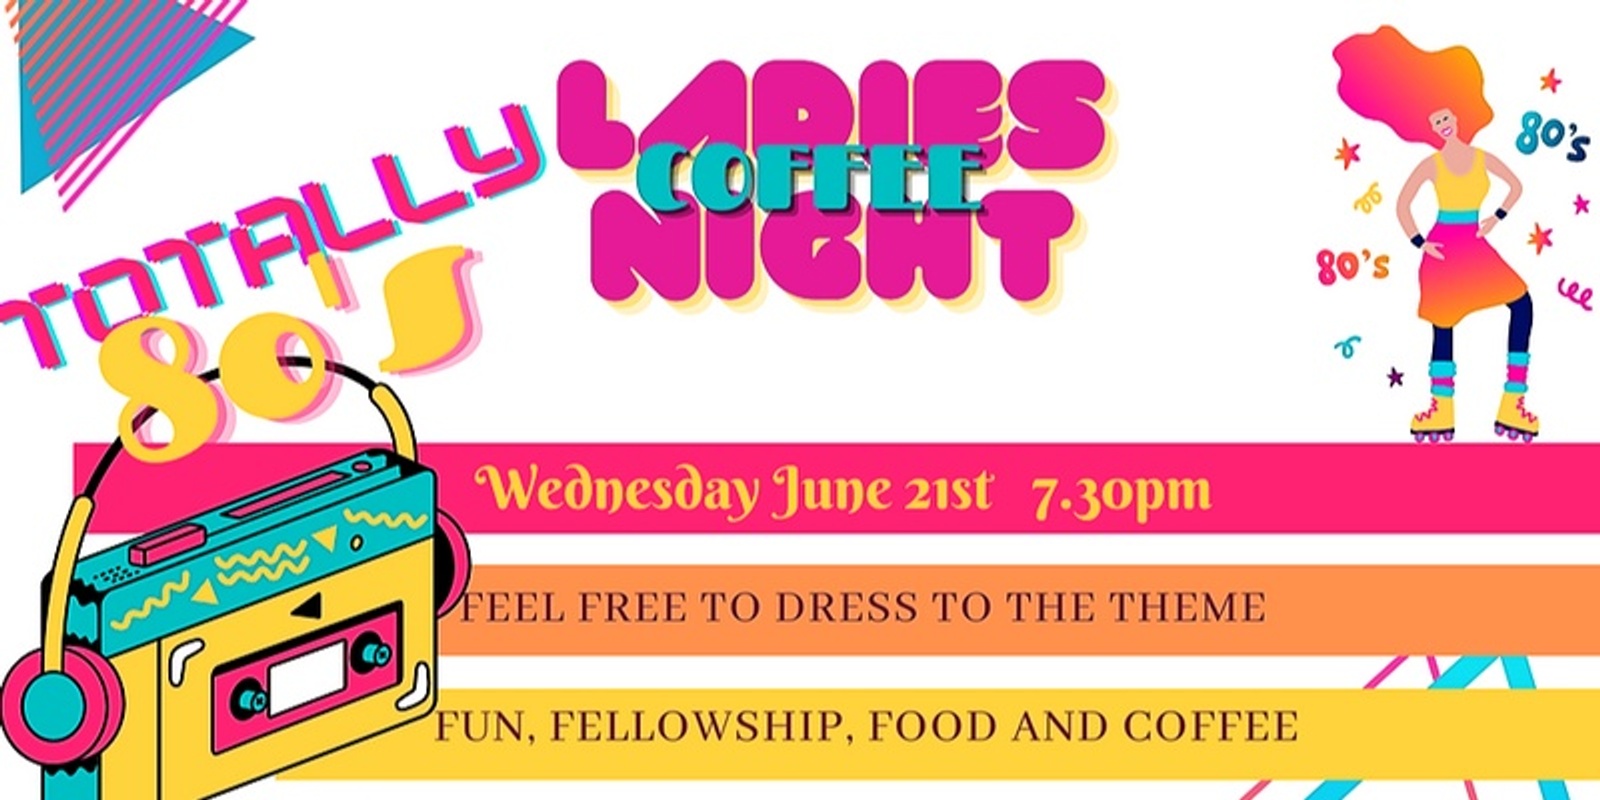 Ladies Coffee Night - Totally 80's